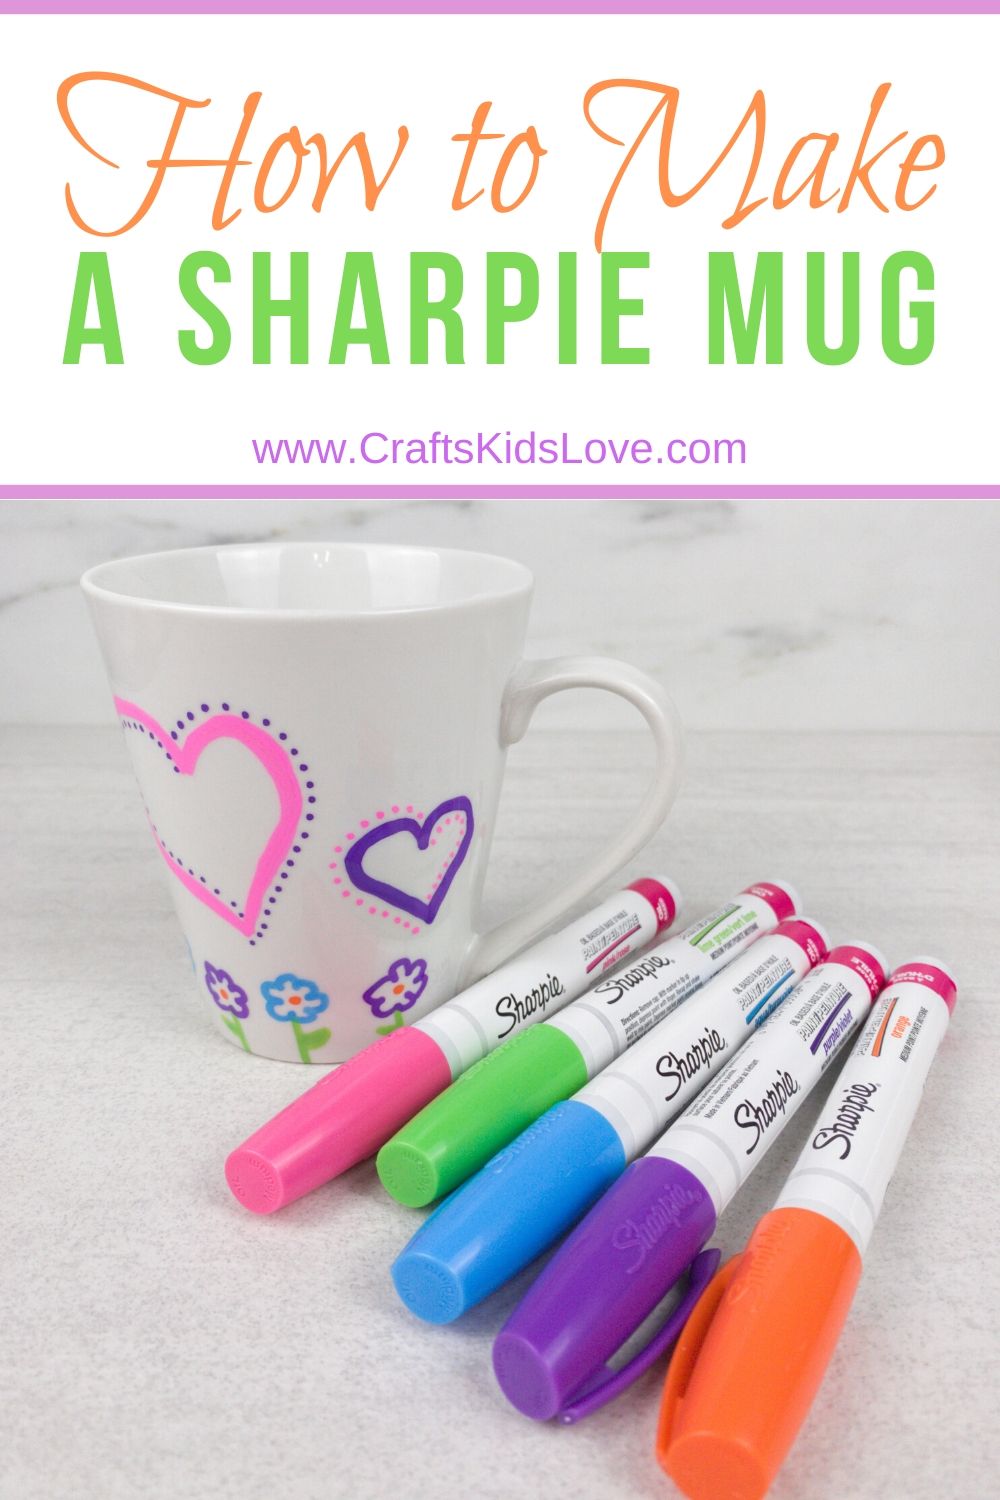 How to make a sharpie mug - a fun and simple craft for kids of all ages | #craftskidslove